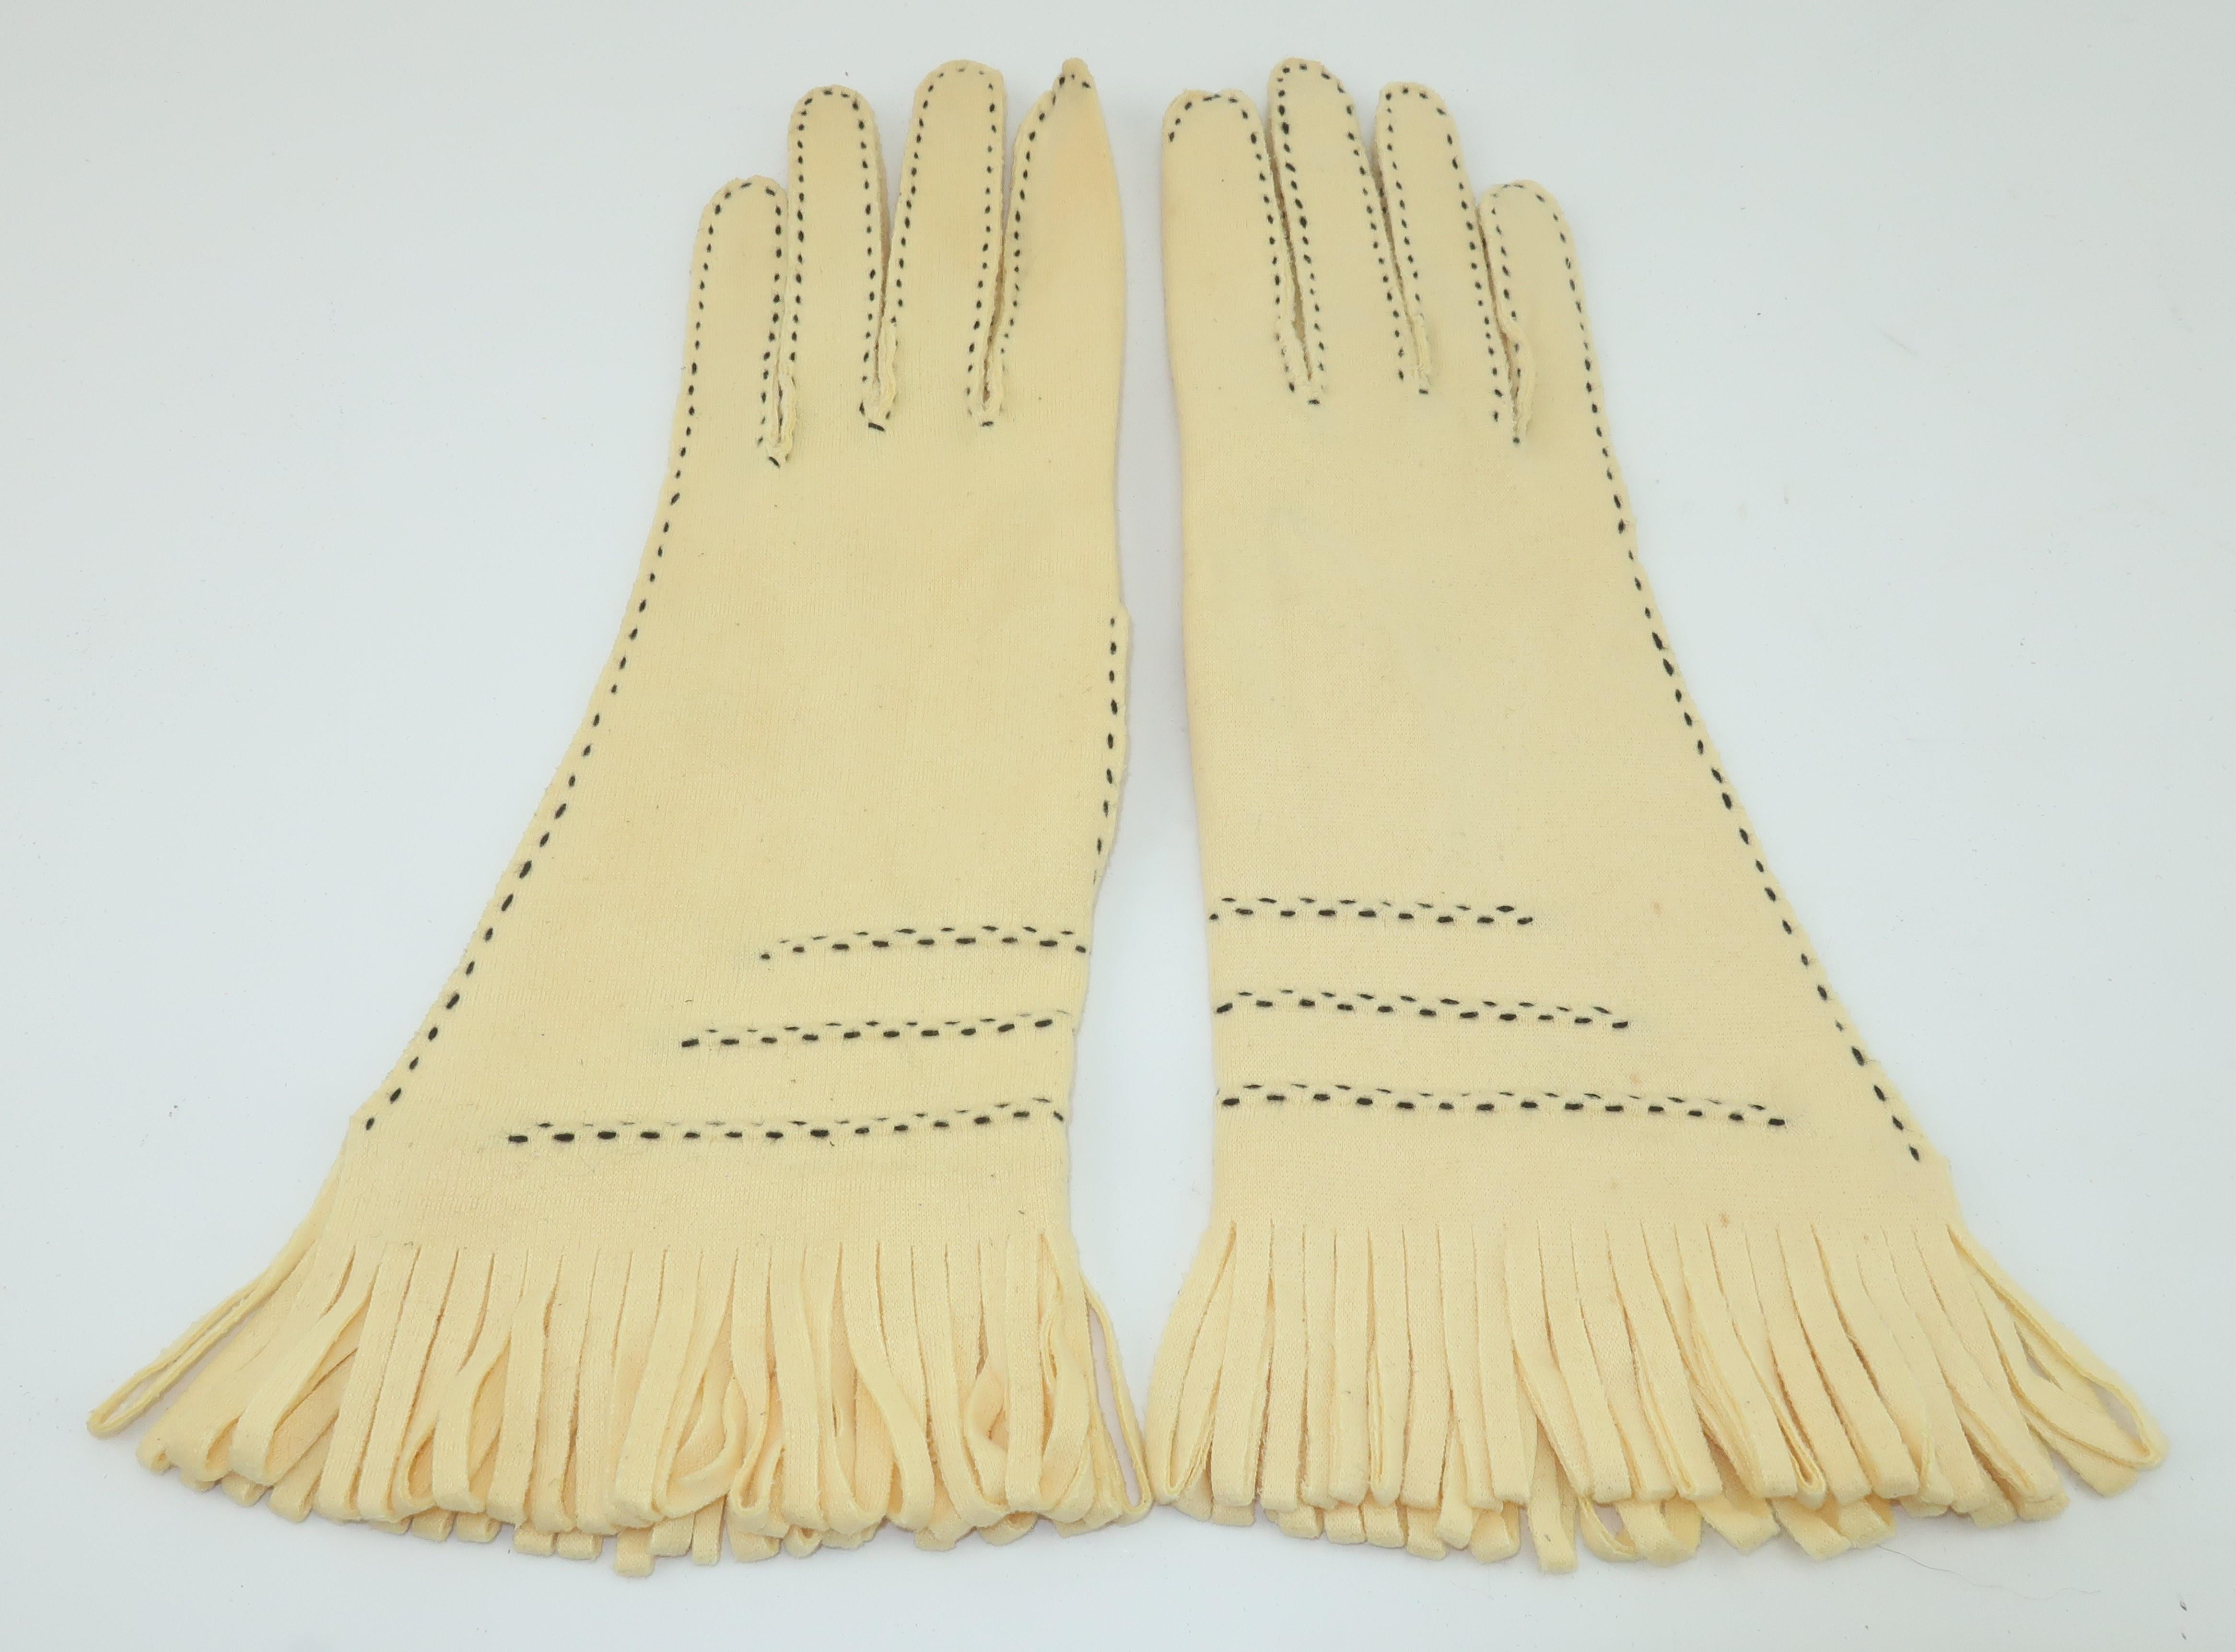 A pair of buttery yellow or creme fabric 1960's gauntlet gloves with black contrast stitching and looped fringe at the cuffs.  The look is reminiscent of fringed Western chamois riding gloves but definitely with a fashionable twist.  No